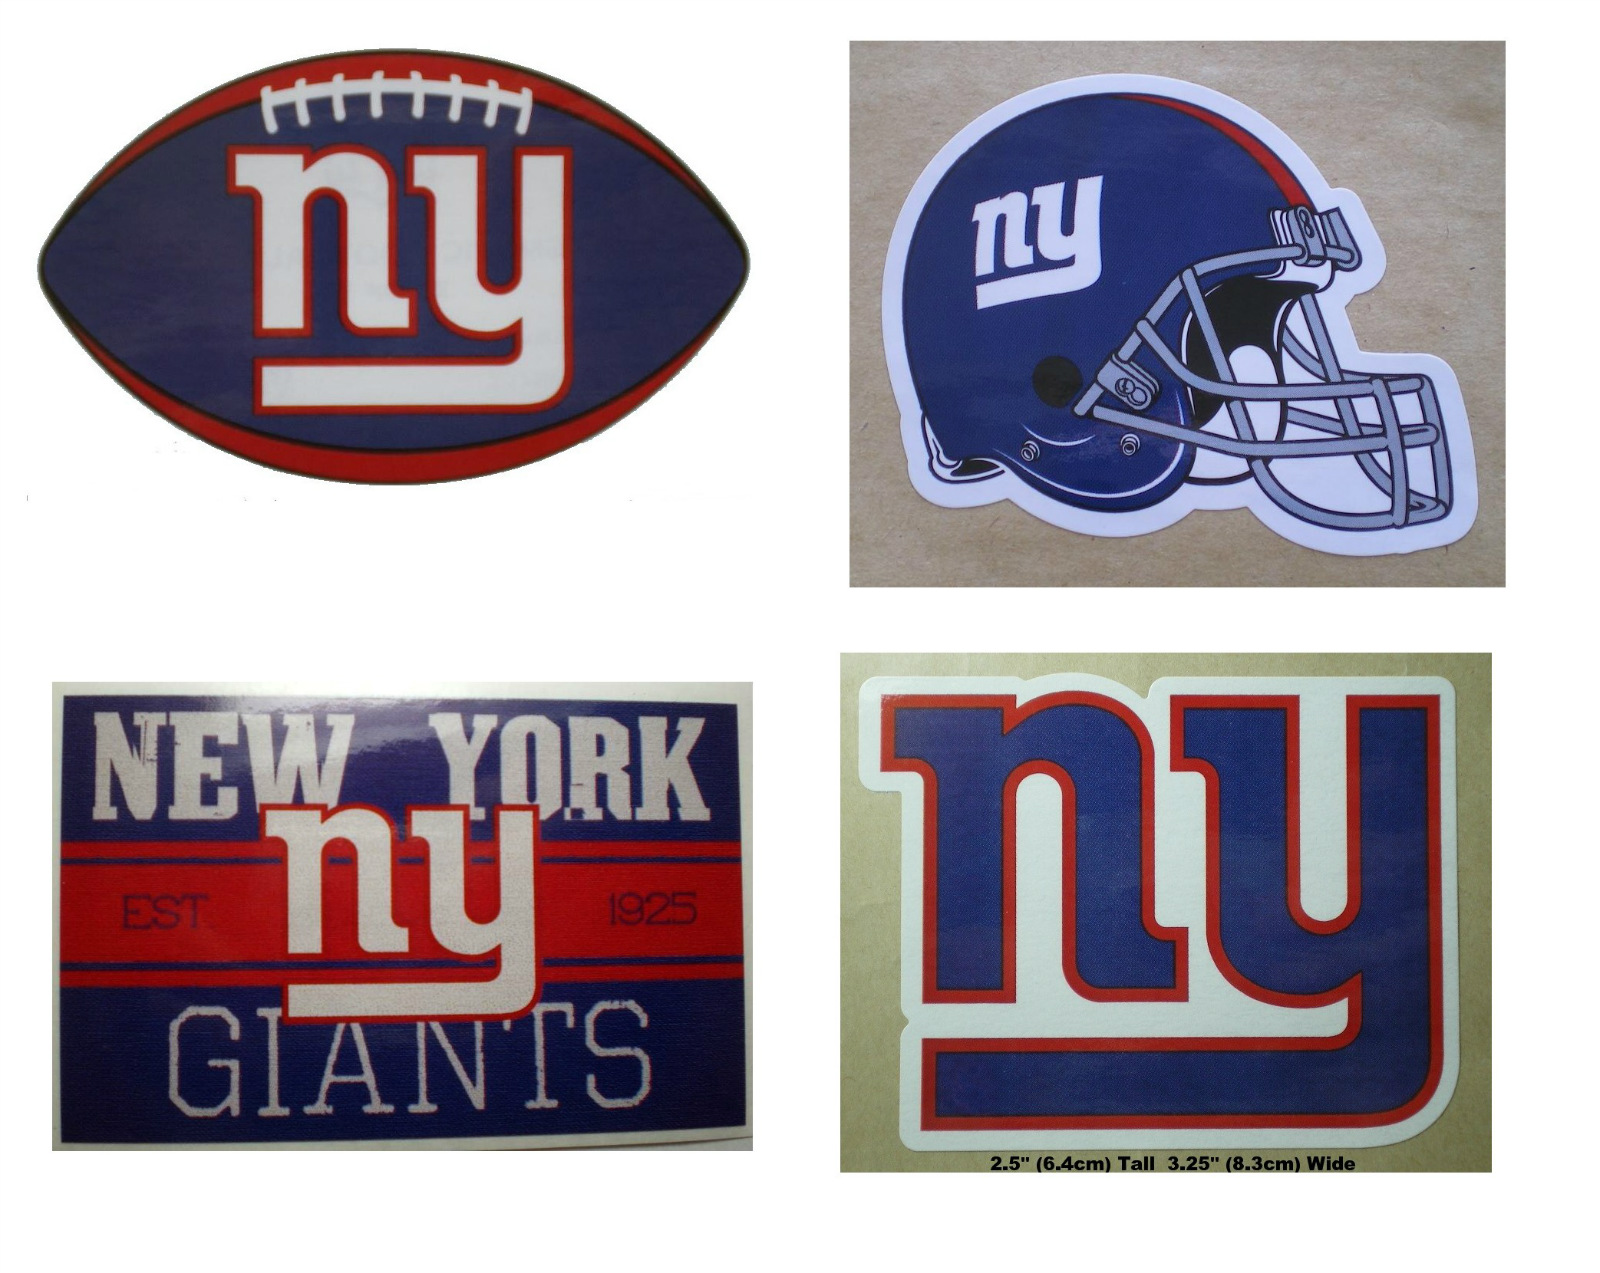 New York Giants Decal Stickers NFL Football Licens